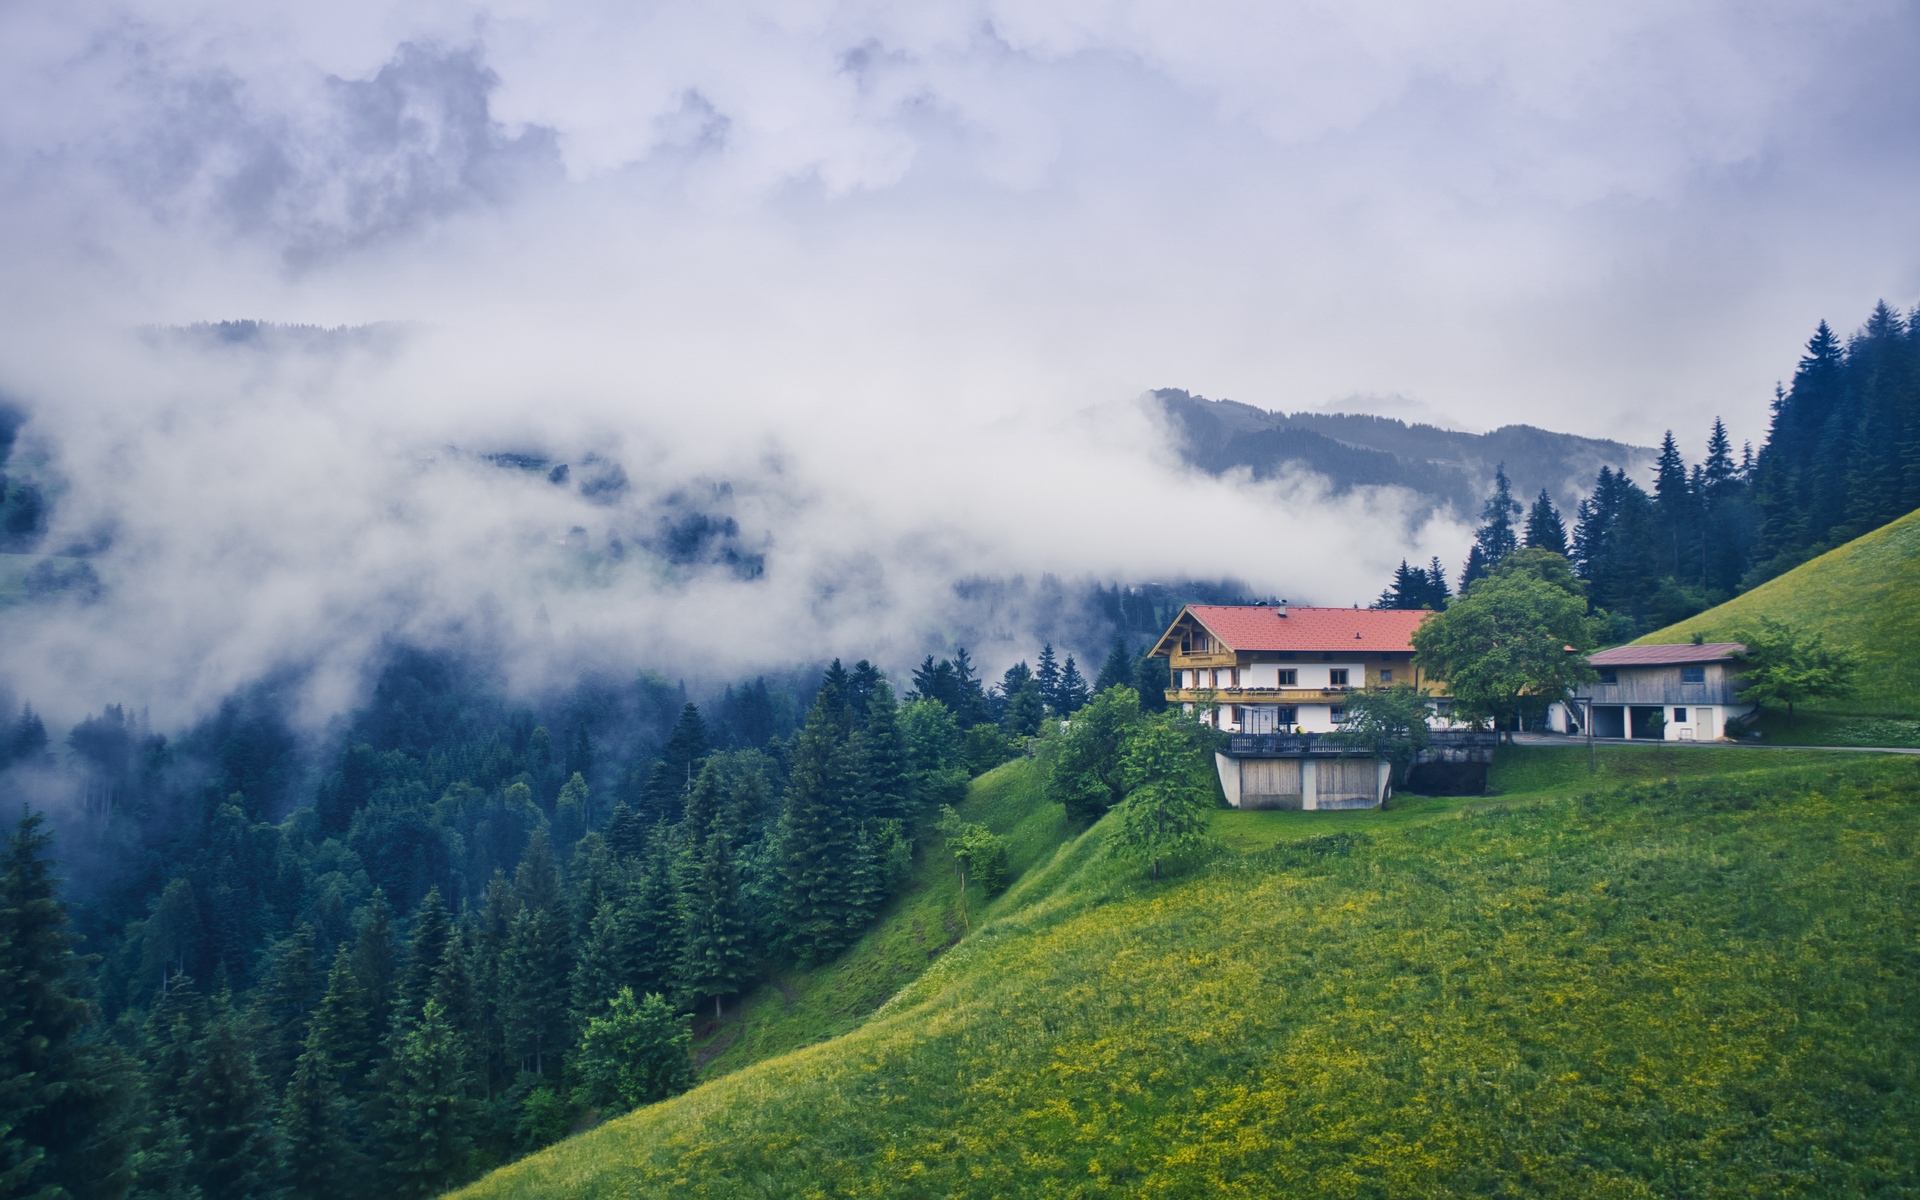 Wallpaper Mountains, House, Clouds, Nature, Landscape - Nature Landscape Hd - HD Wallpaper 